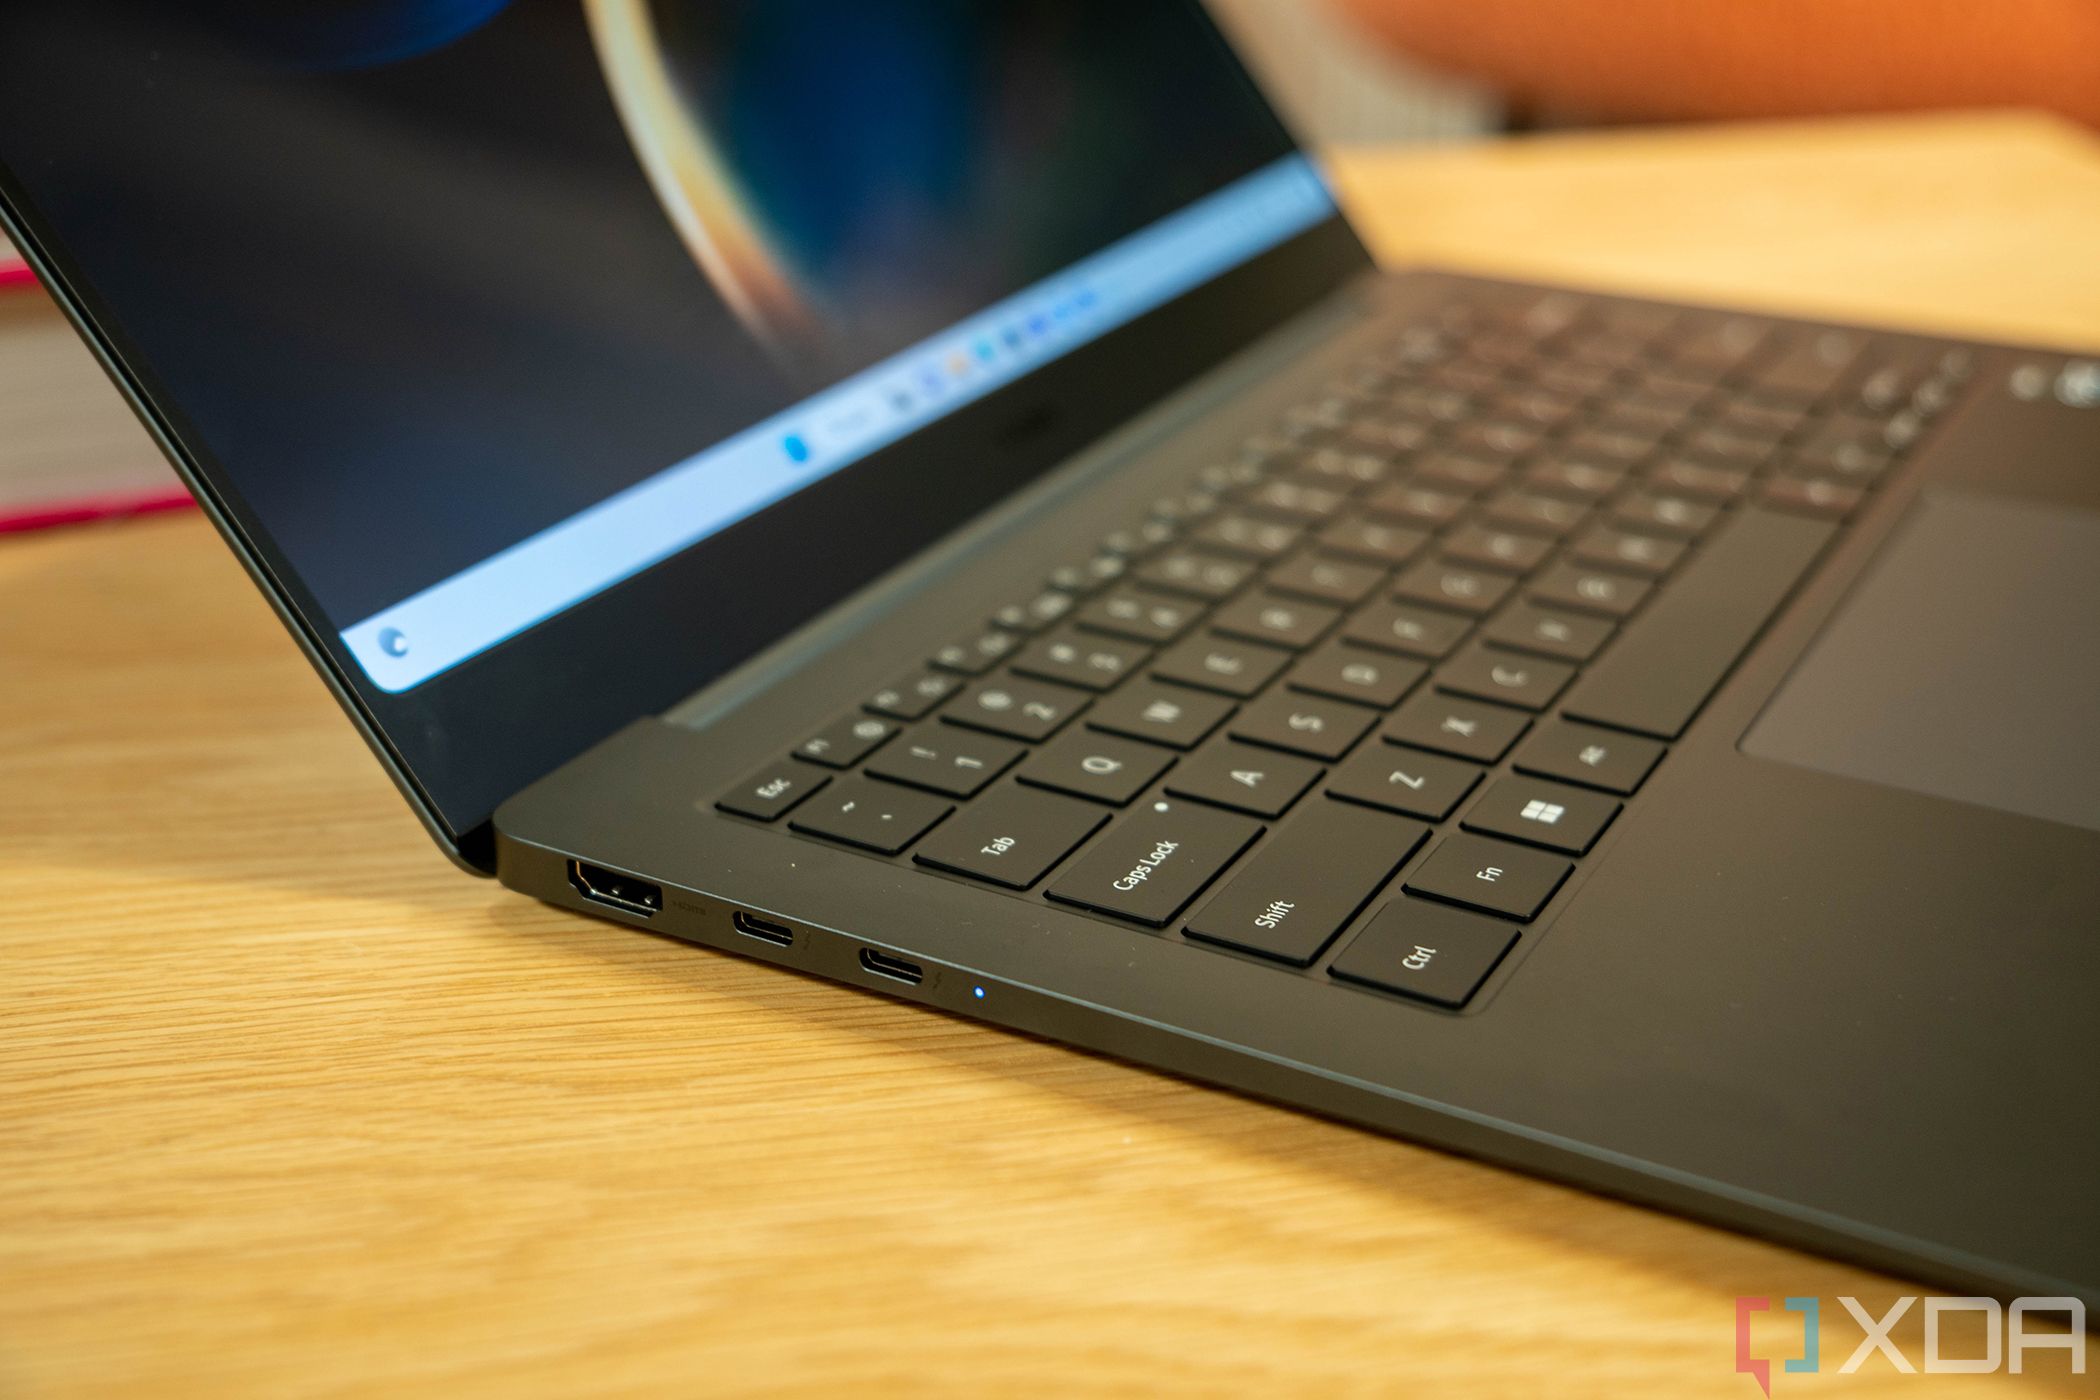 Samsung’s new Galaxy laptops have the ports I wish more premium laptops had